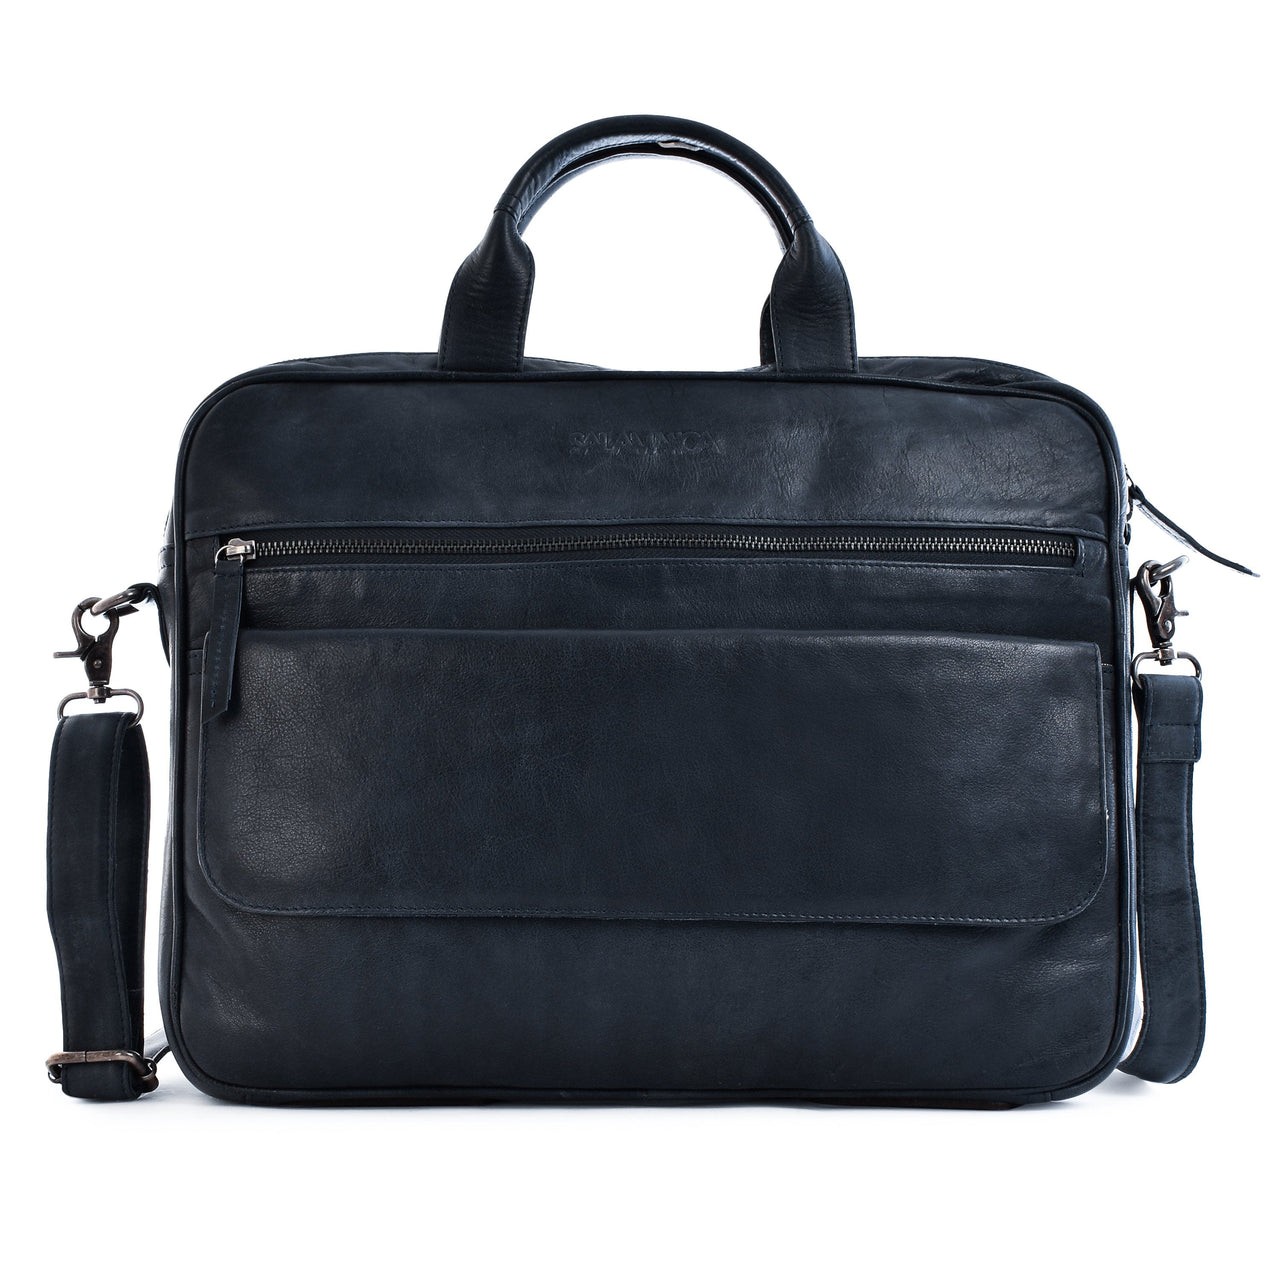 StrapIt Business Bag - Midnight Blue - Laptop Bags